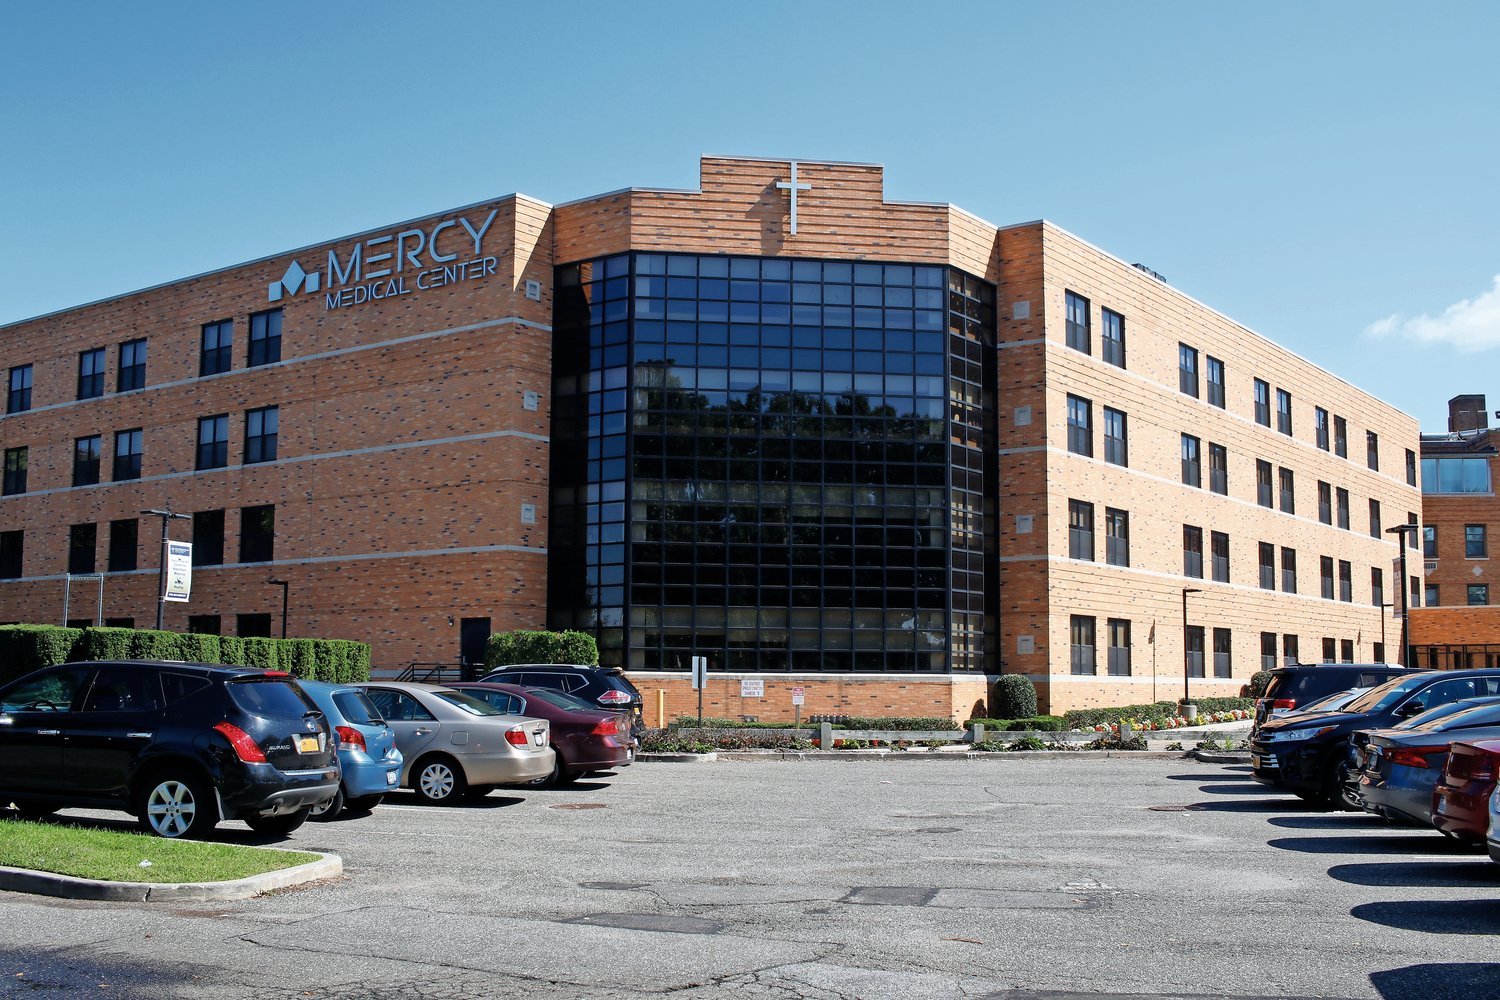 Catholic Health’s Mercy Hospital has stood on its Rockville Centre campus for over 100 years. This year it will honor three distinguished guests for their service to the hospital and its staff.